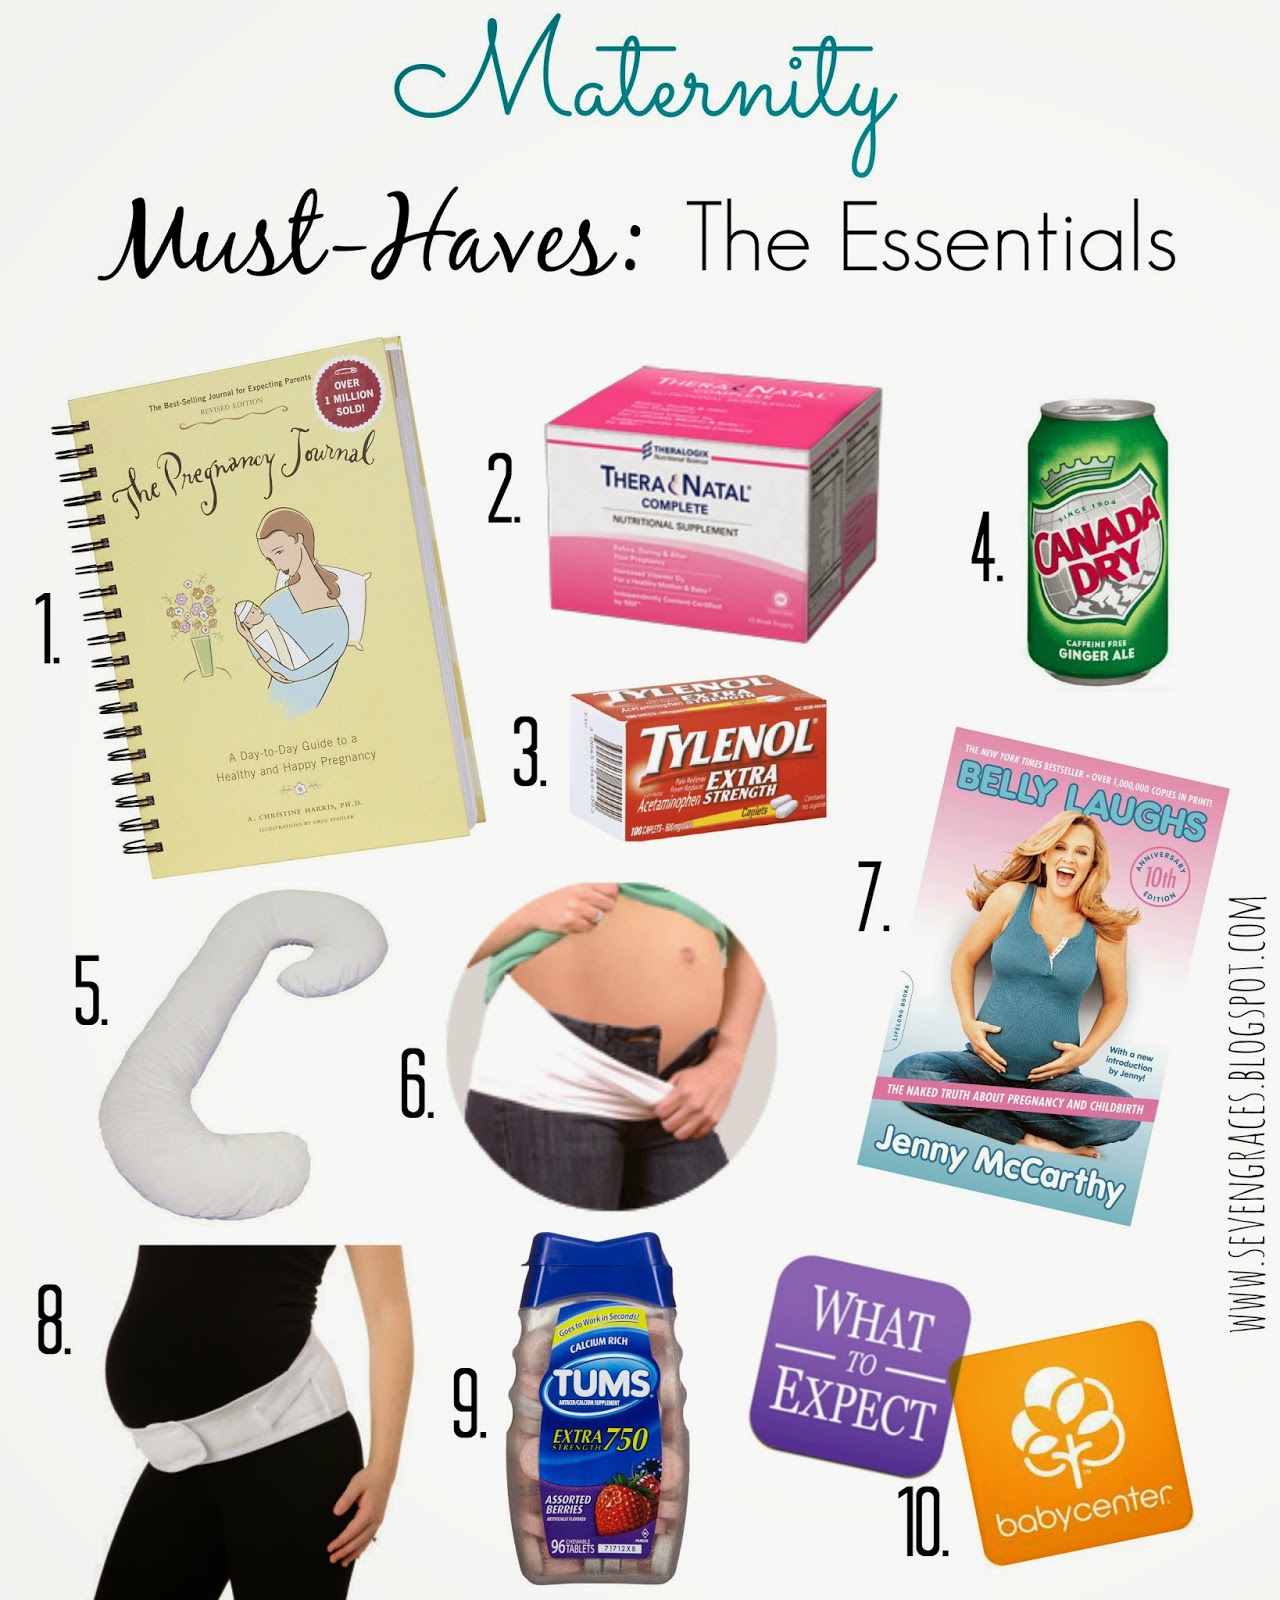 Pregnancy Travel Essentials: The Ultimate 12 Must-Haves for